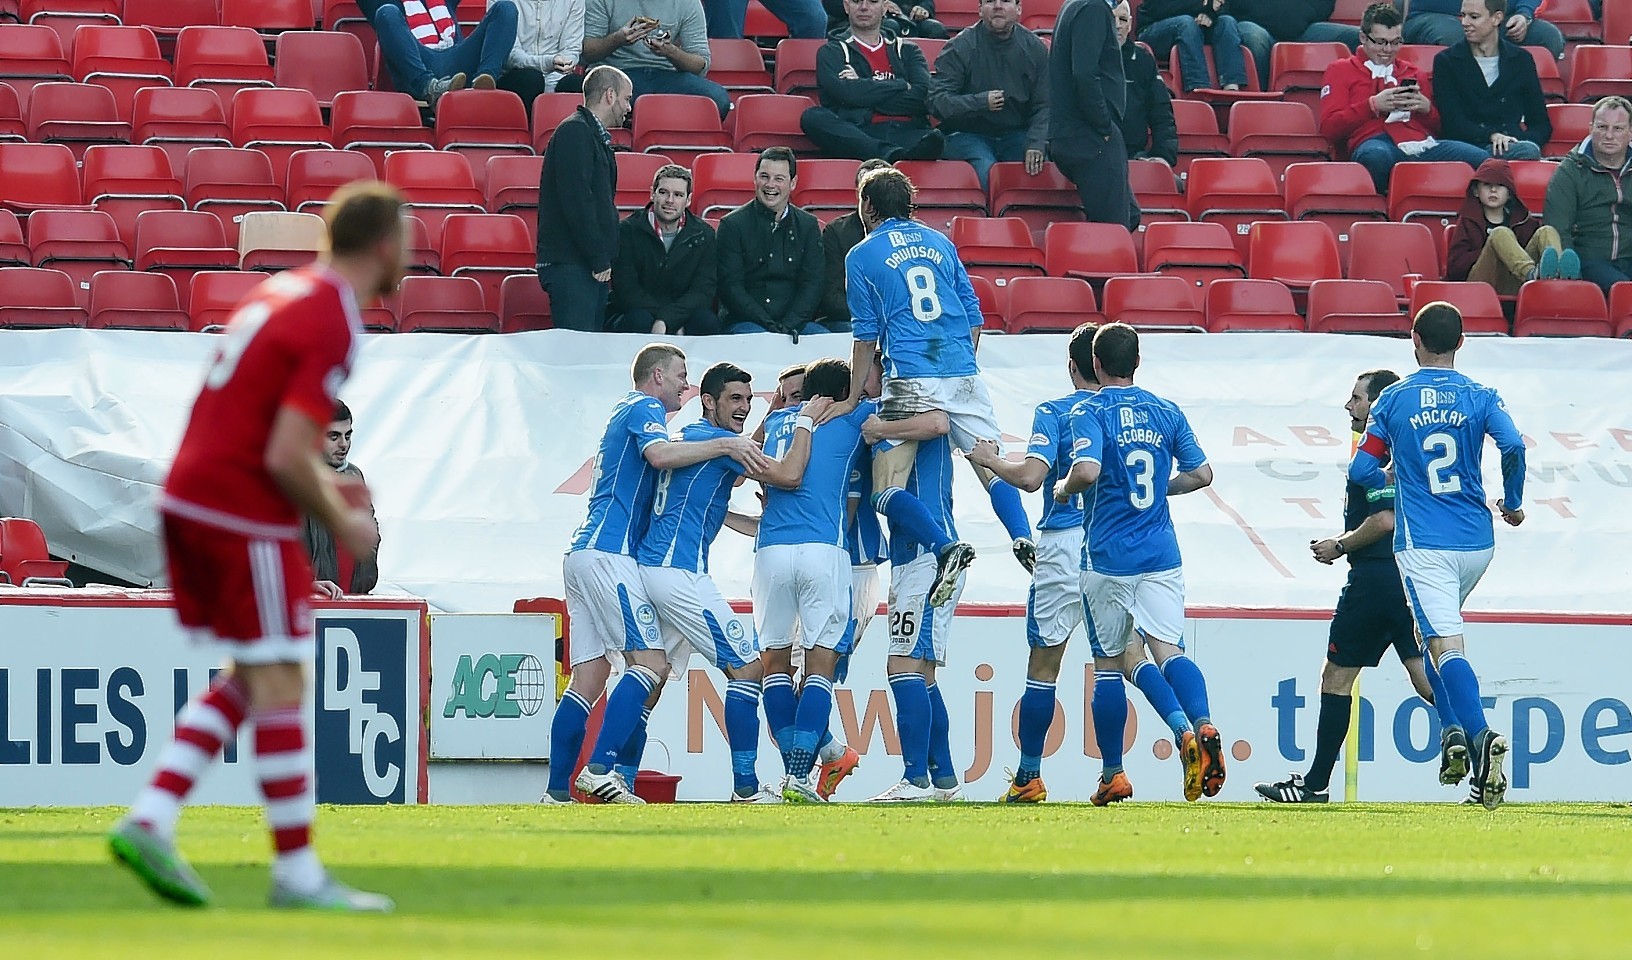 St Johnstone celebrate as they go 5-1 in front